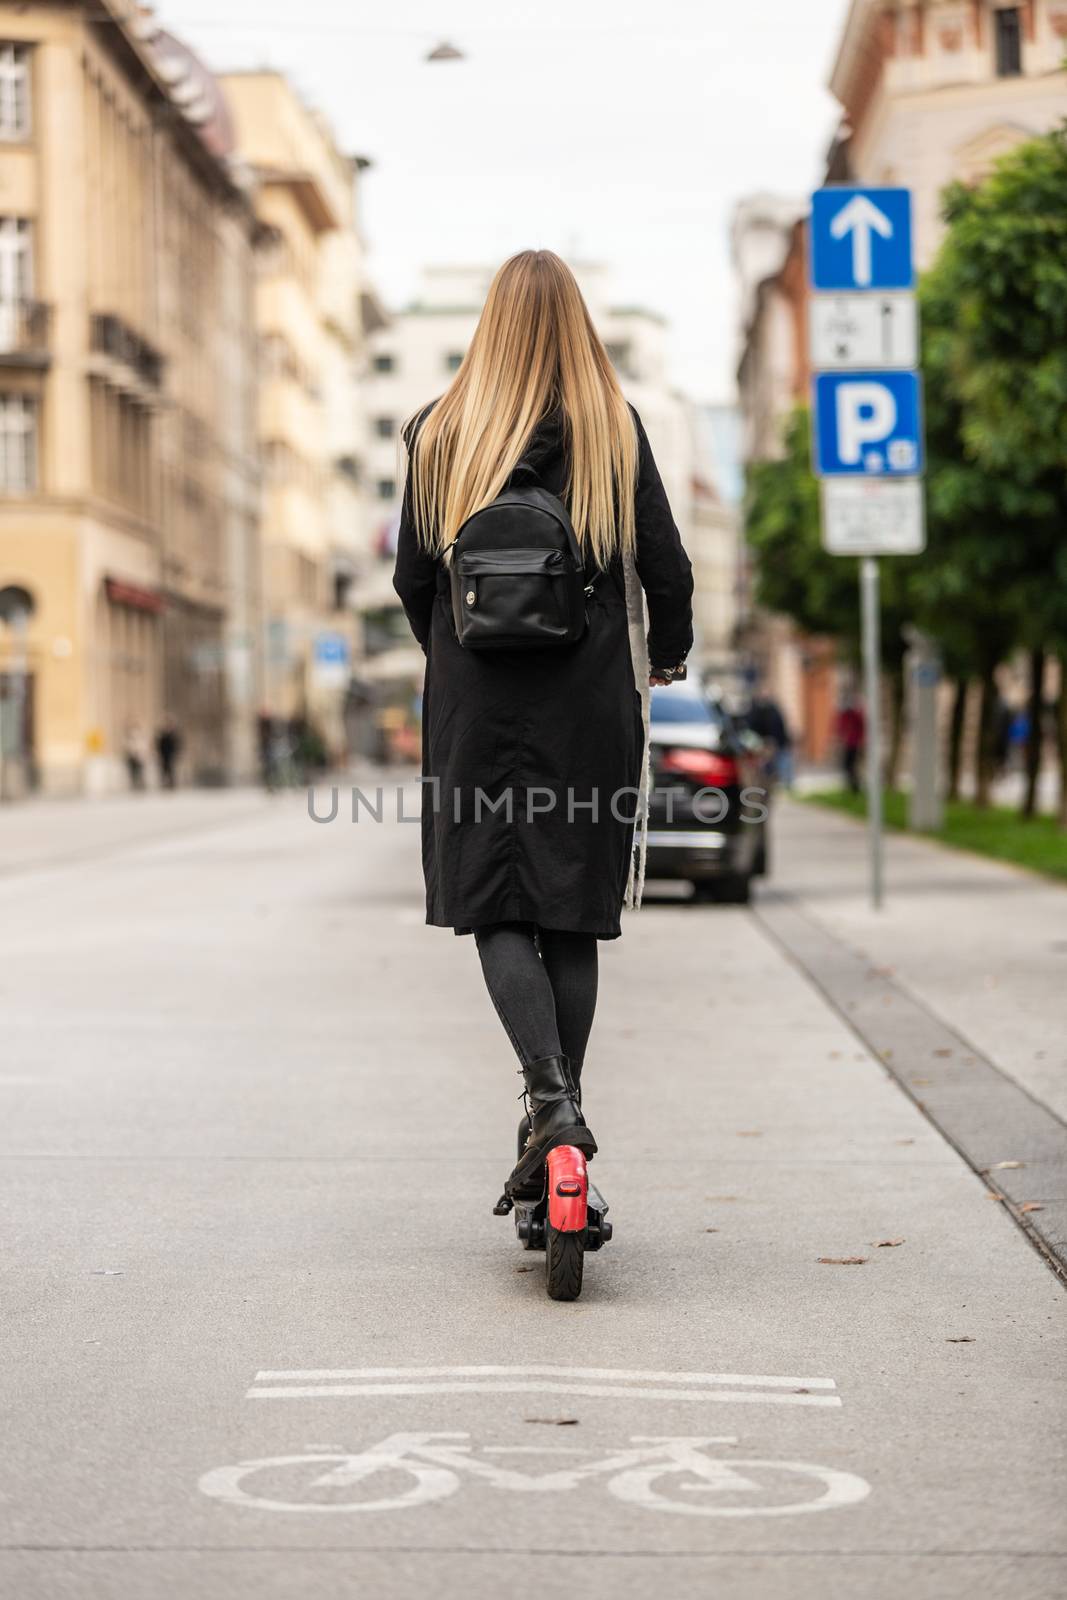 Rear view of girl riding public rental electric scooter in urban city environment. New eco-friendly modern public city transport in Ljubljana by kasto